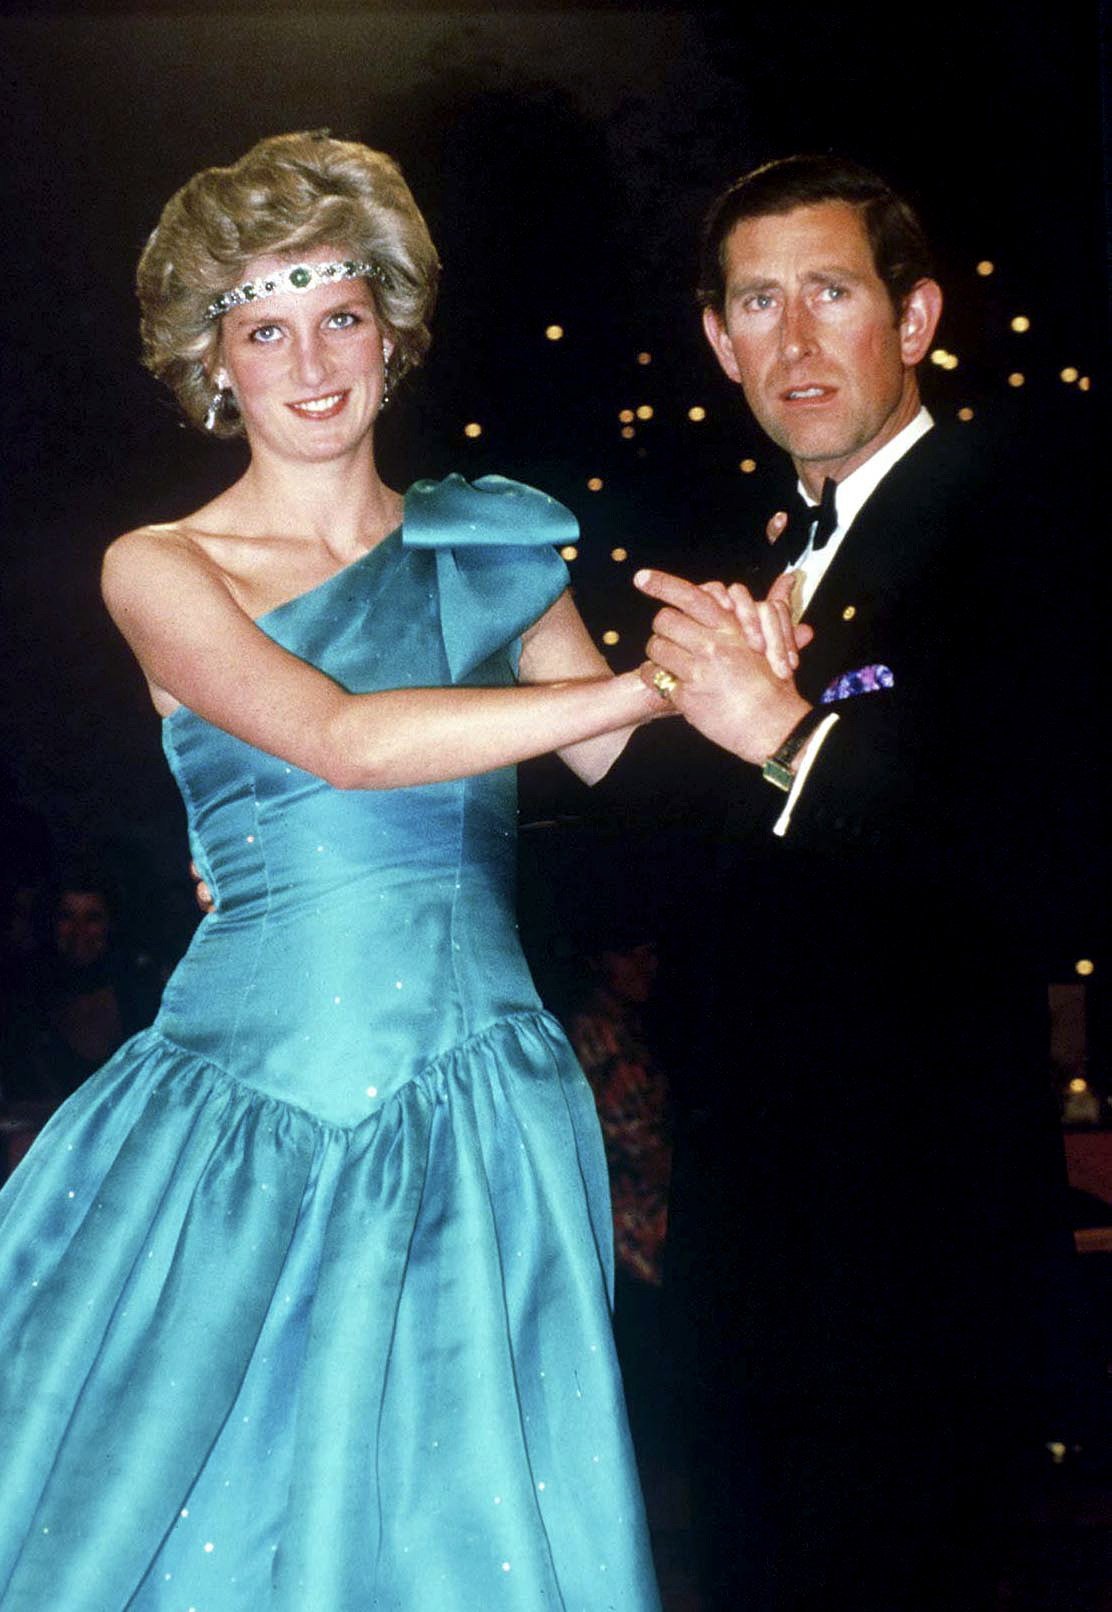 Princess Diana and Prince Charles in Australia on October 1, 1985 | Source: Getty Images